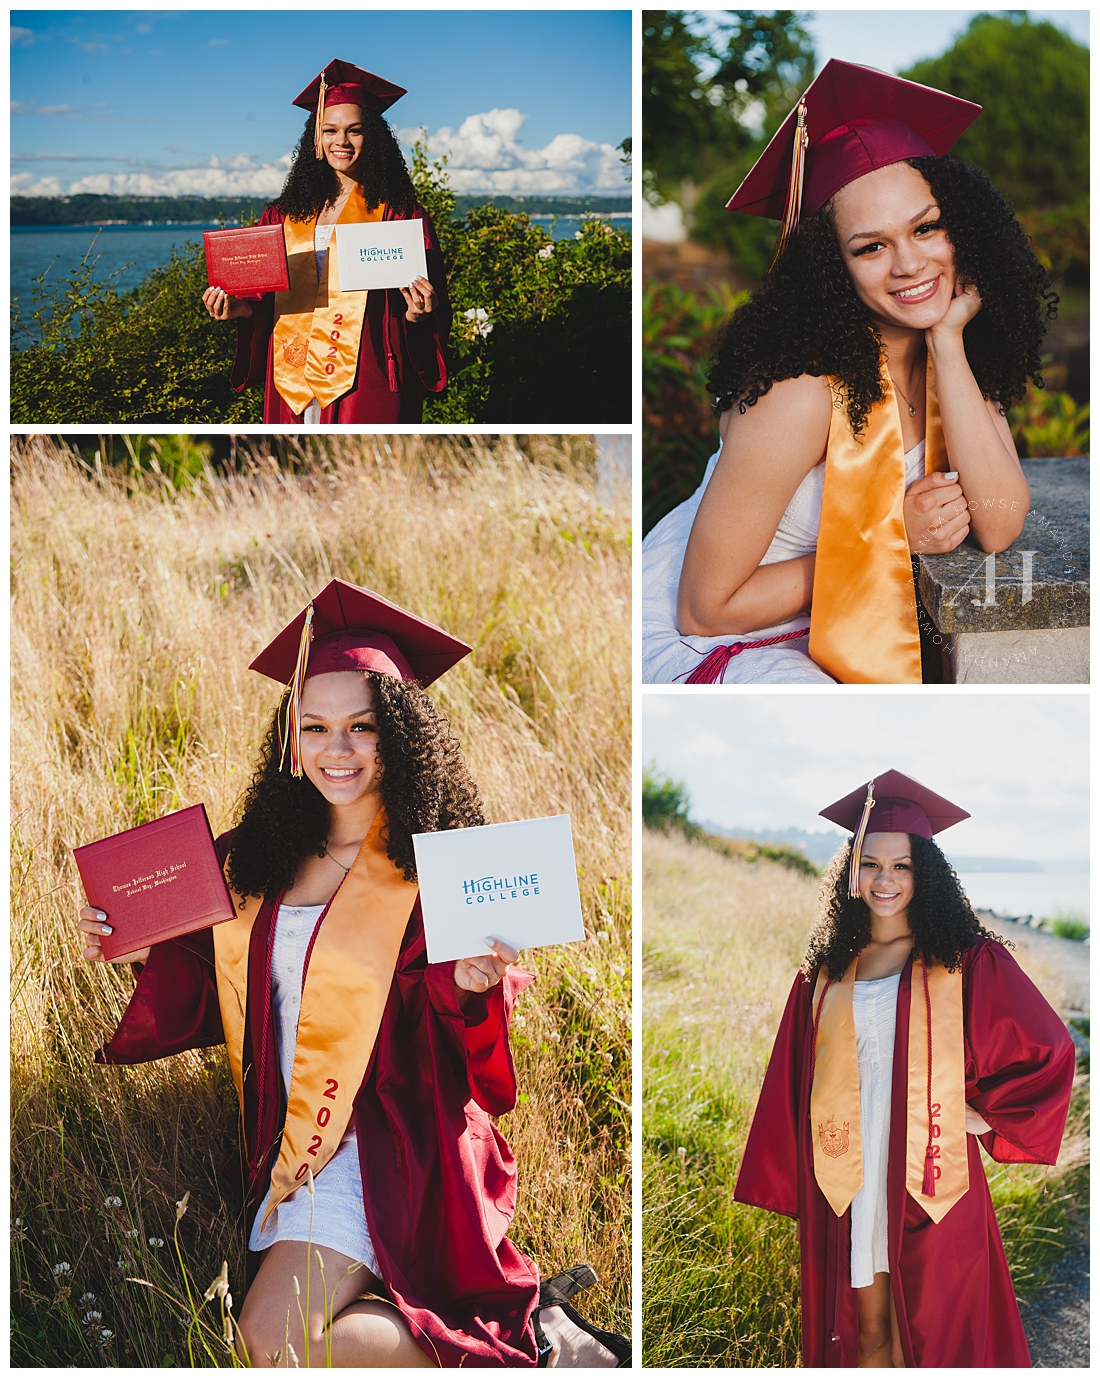 Outdoor Cap and Gown Portraits in Tacoma | Red and Gold Cap and Gown Portraits, Posing with Your Diploma, Modern Senior Portraits for Graduation | Photographed by the Best Tacoma Senior Photographer Amanda Howse